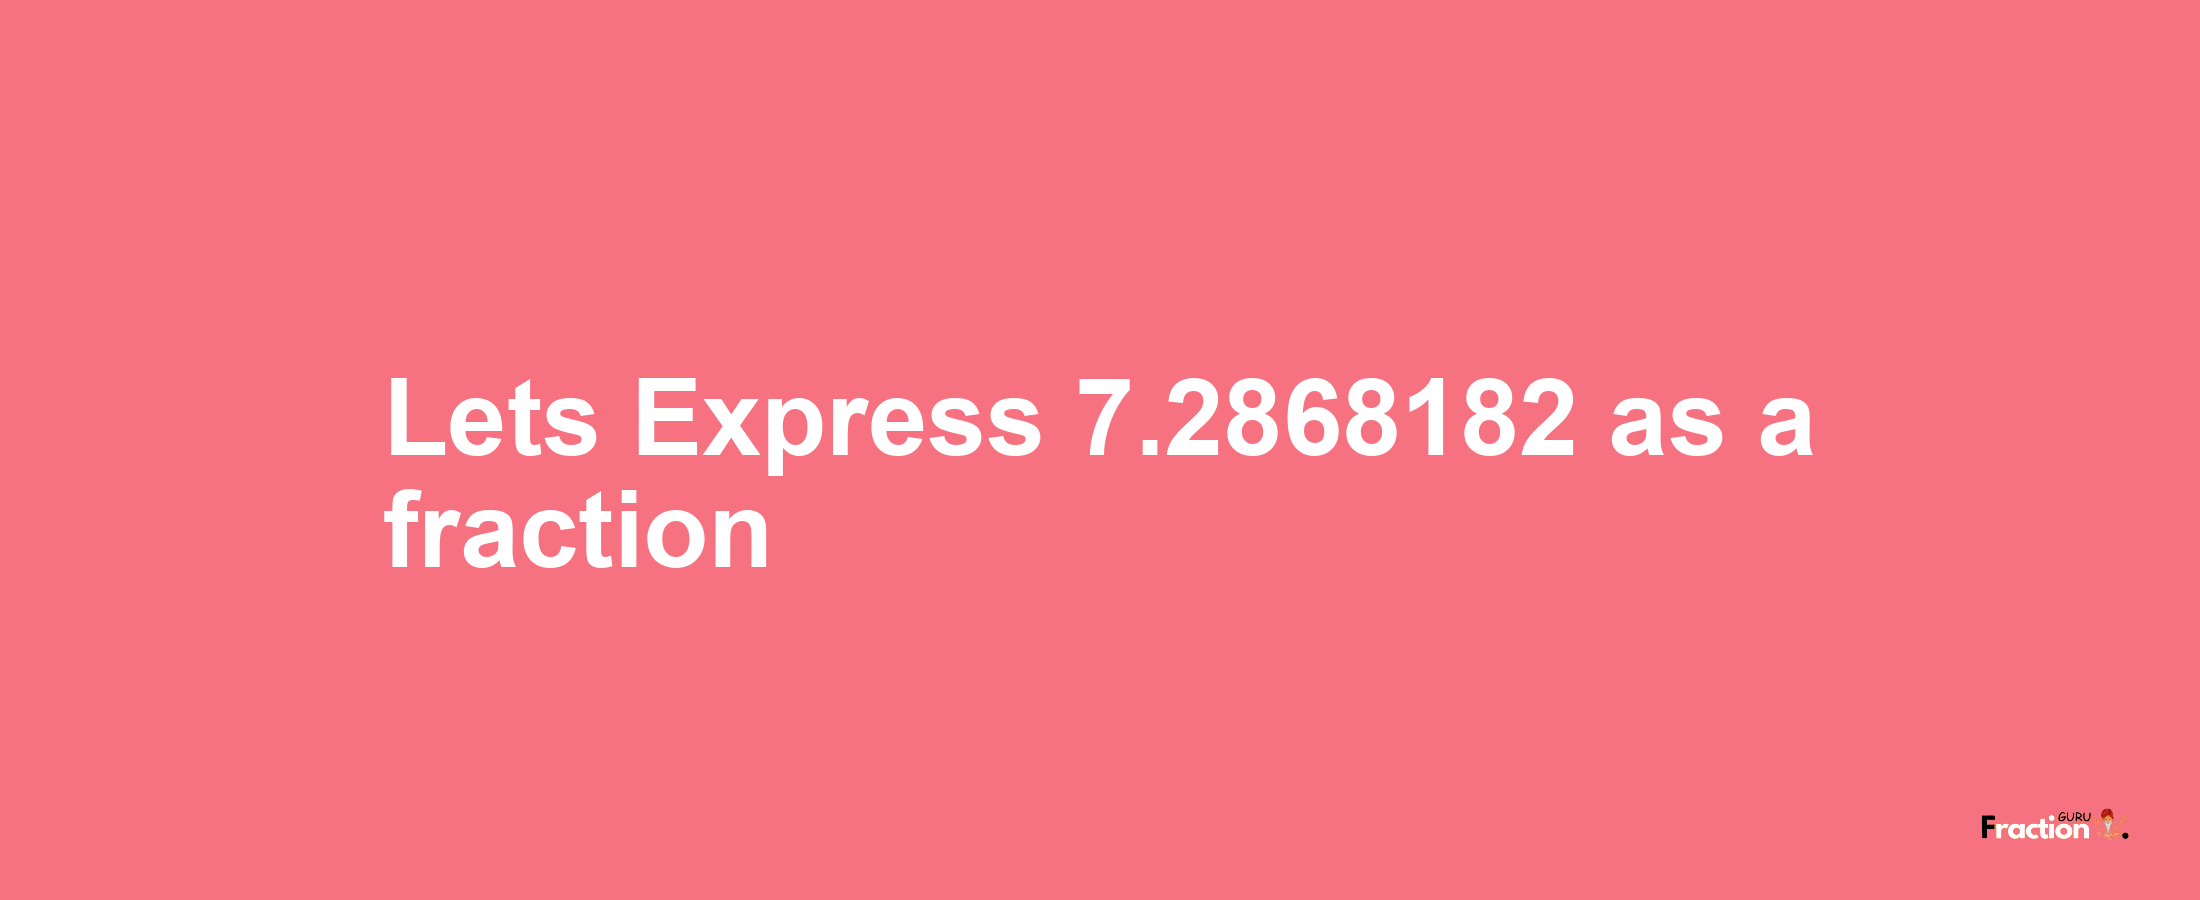 Lets Express 7.2868182 as afraction